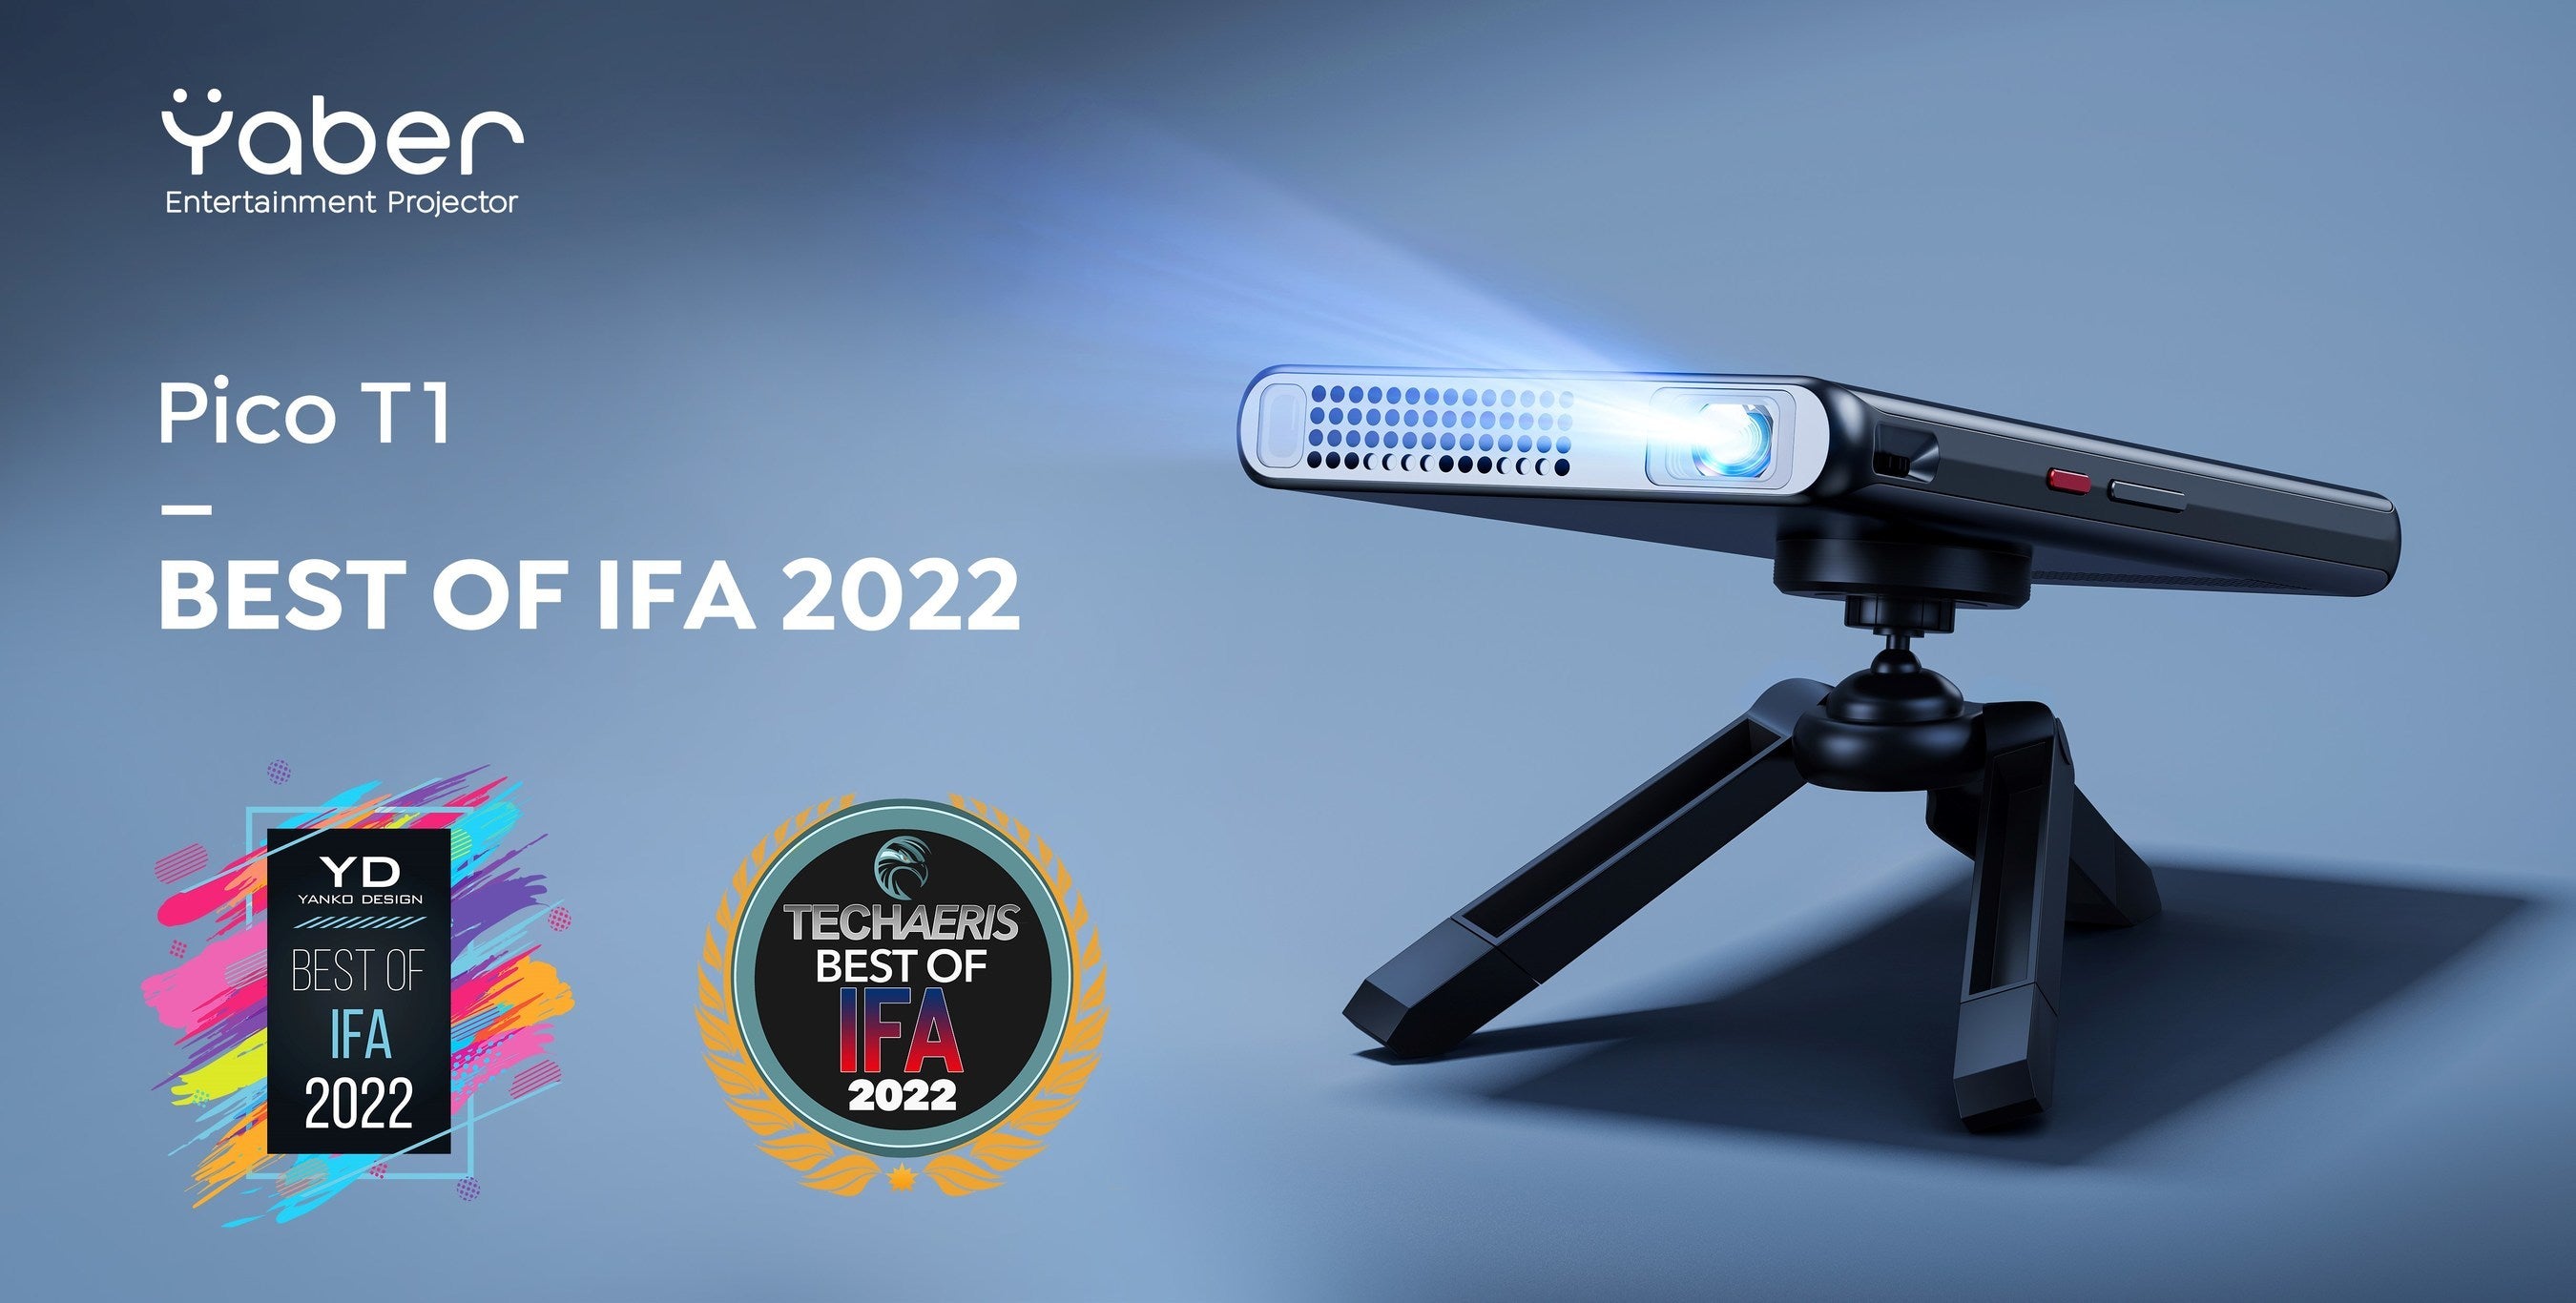 Yaber Pico T1 Projector Wins Best of IFA 2022 Awards